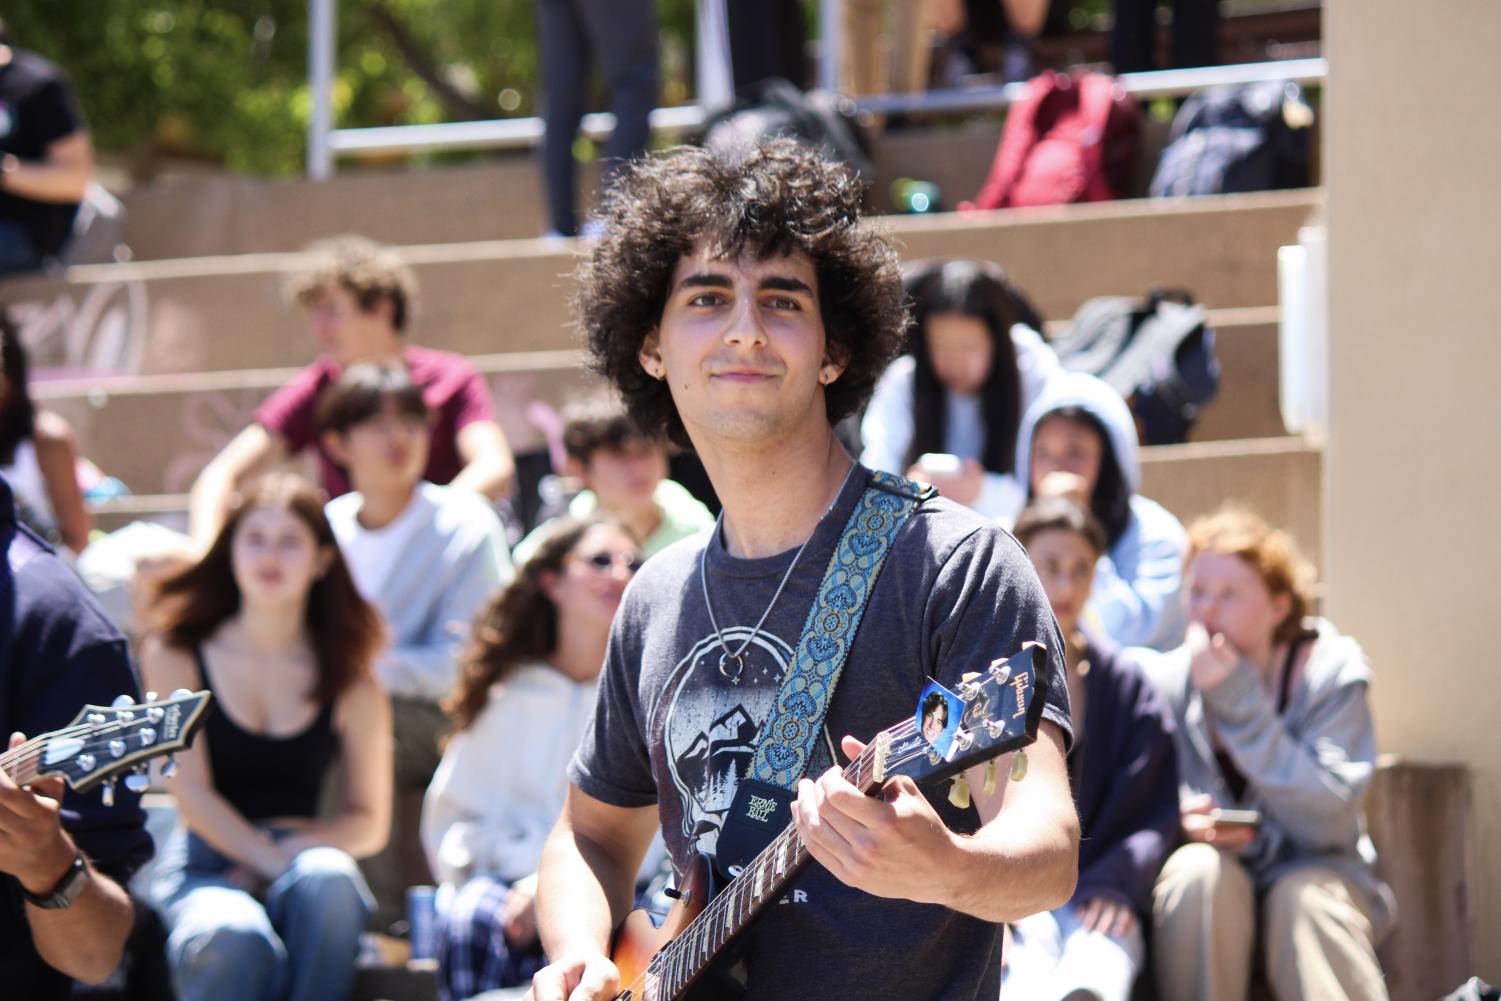 Ravi Hasan enjoys the moment as he performs music in the school quad.